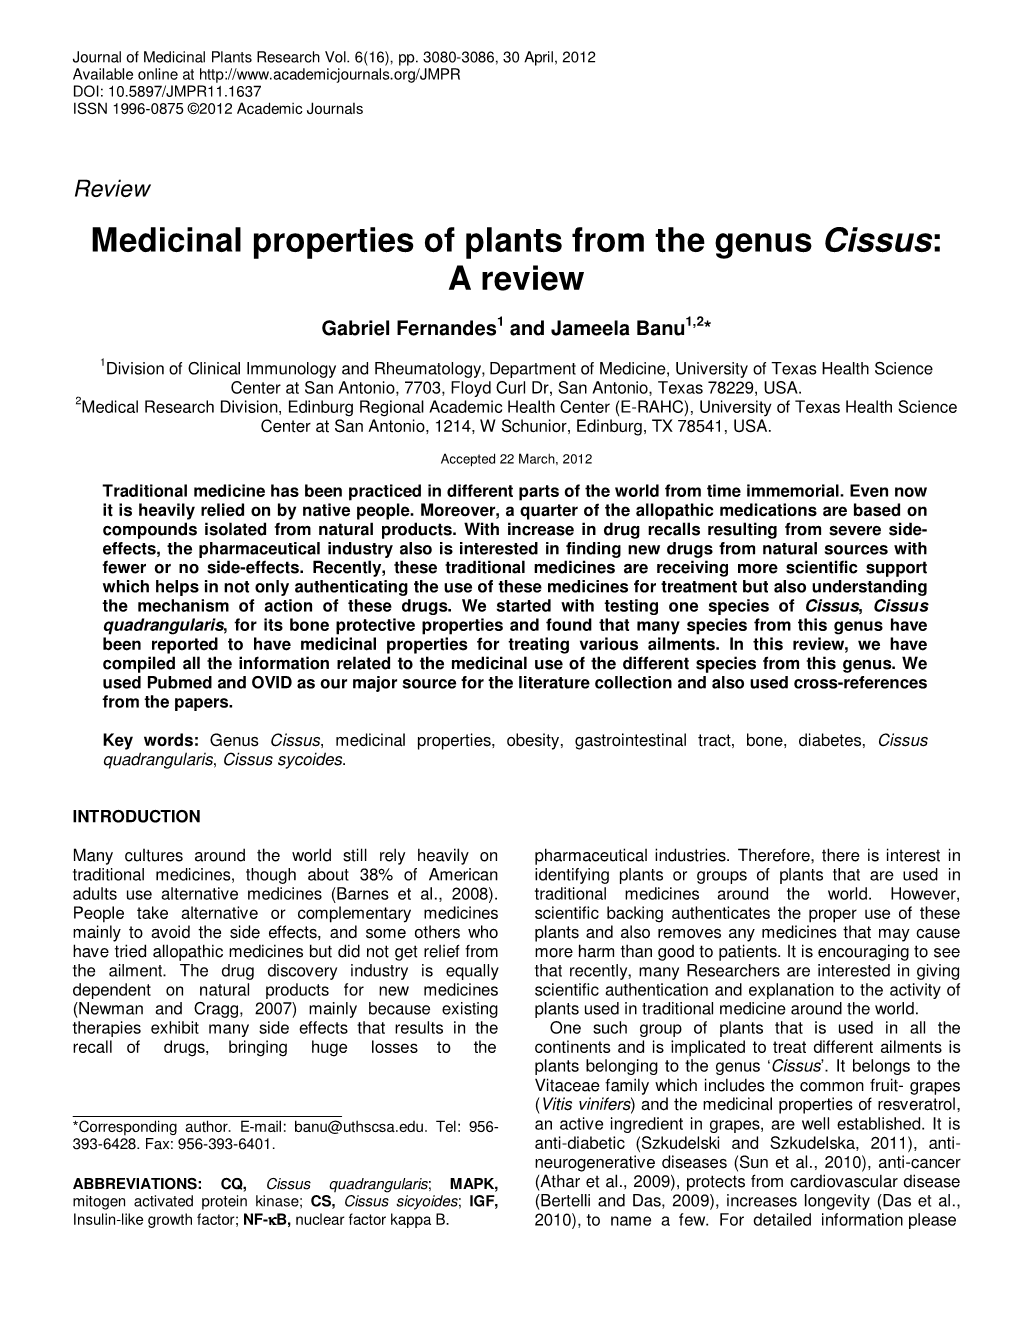 Medicinal Properties of Plants from the Genus Cissus: a Review